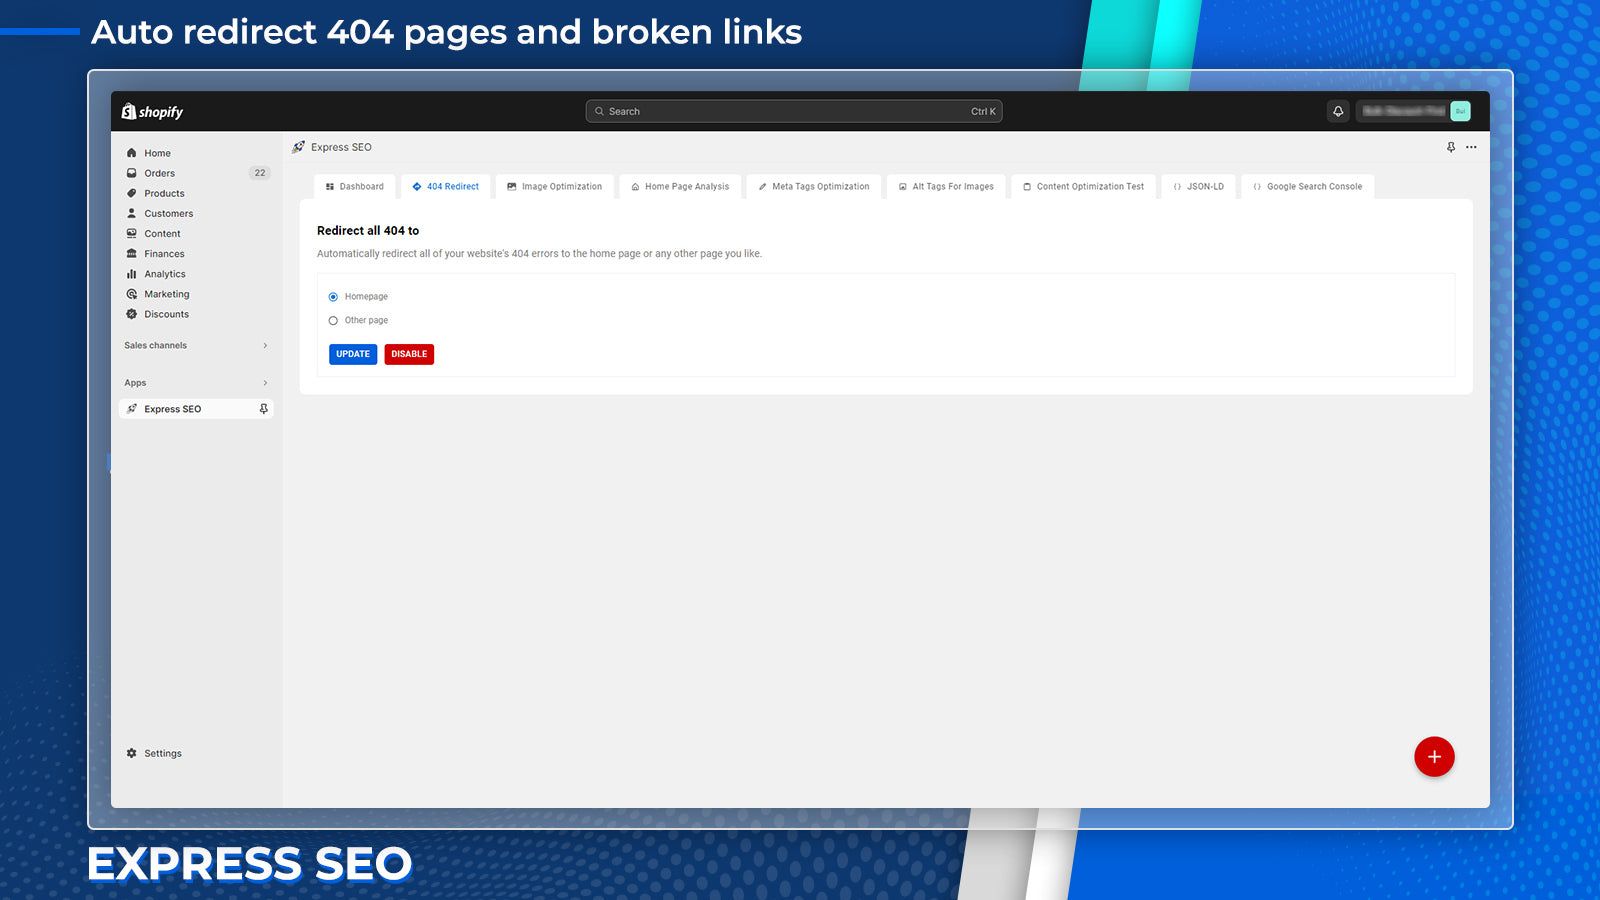 Auto redirect 404 pages and broken links